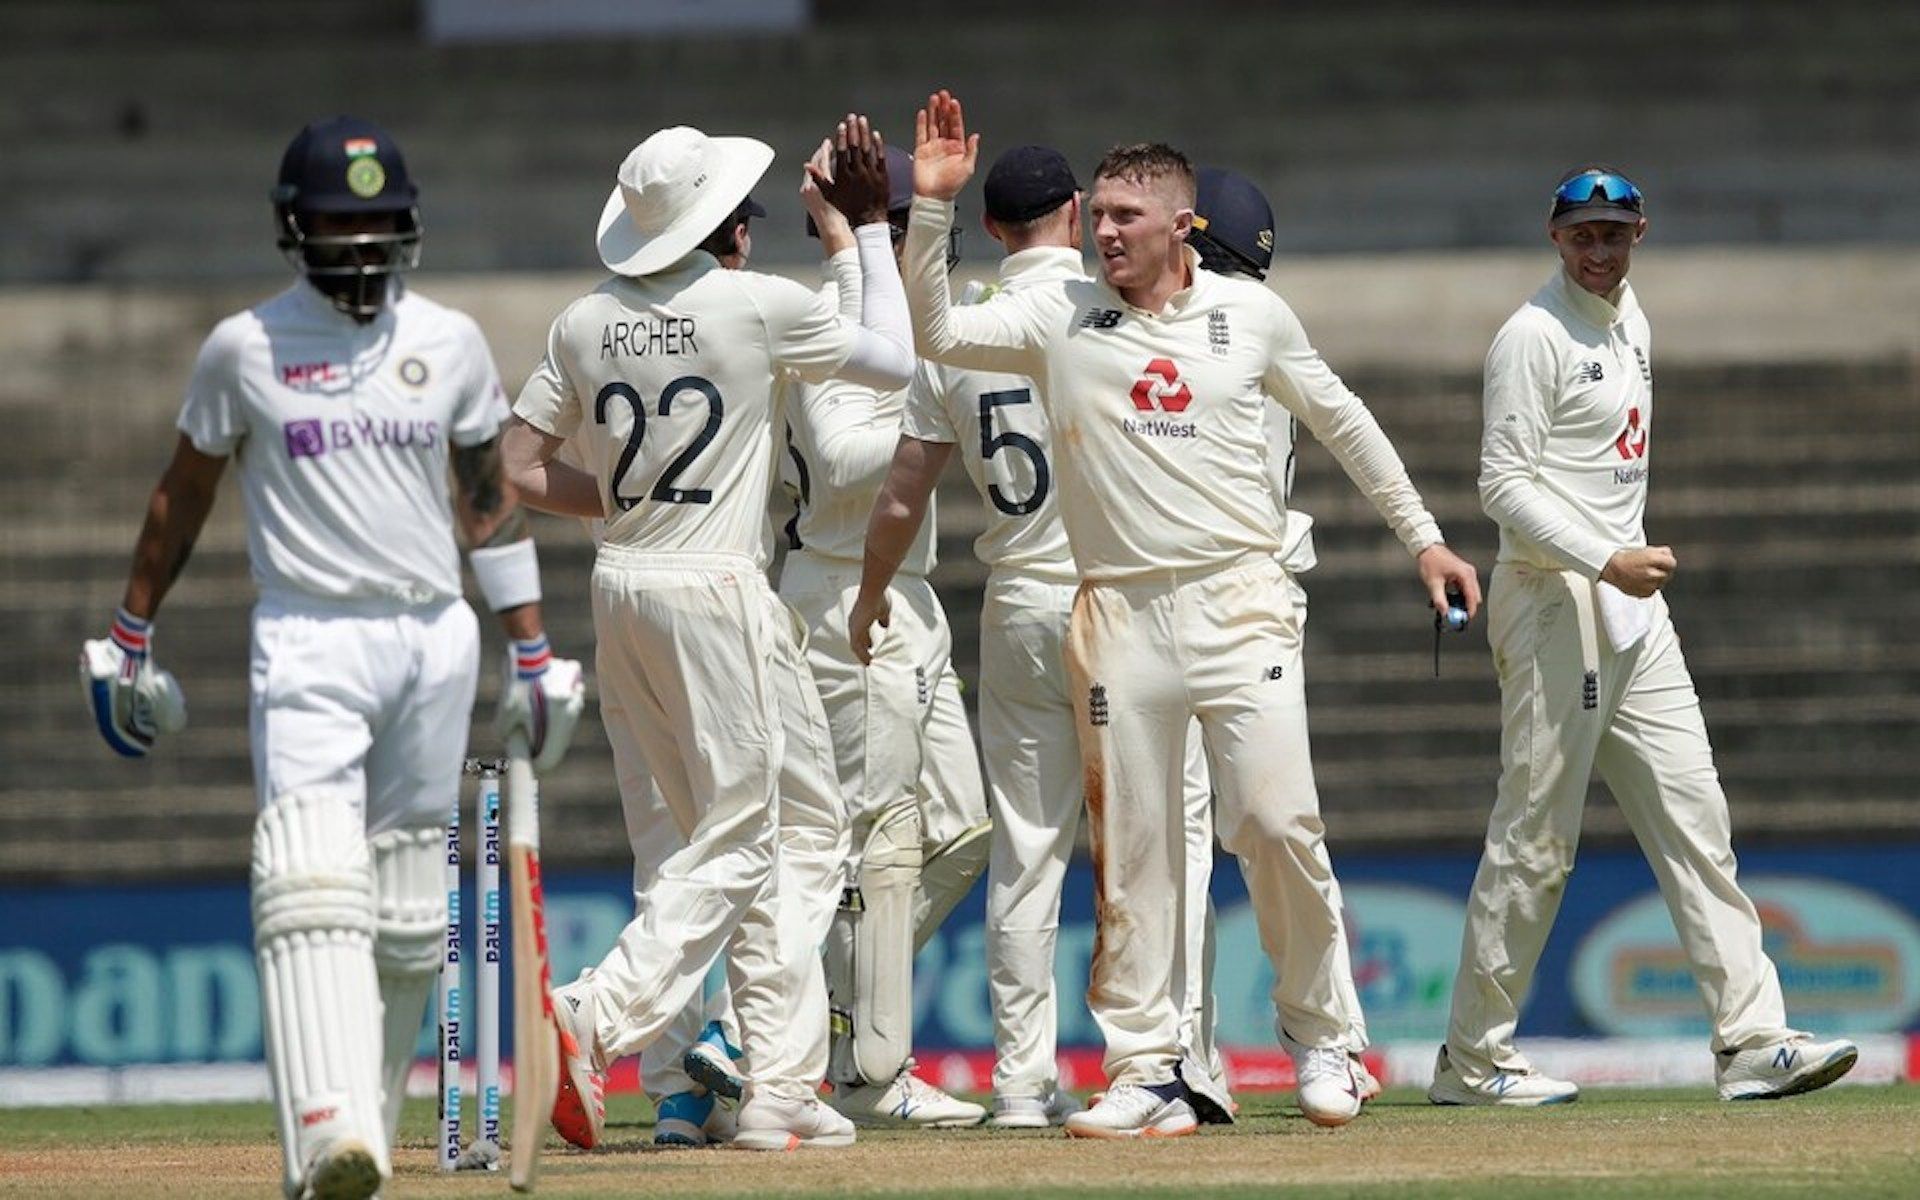 England posted a massive win over India in Chennai in the 1st Test of the 2021 series. Source: Telegraph